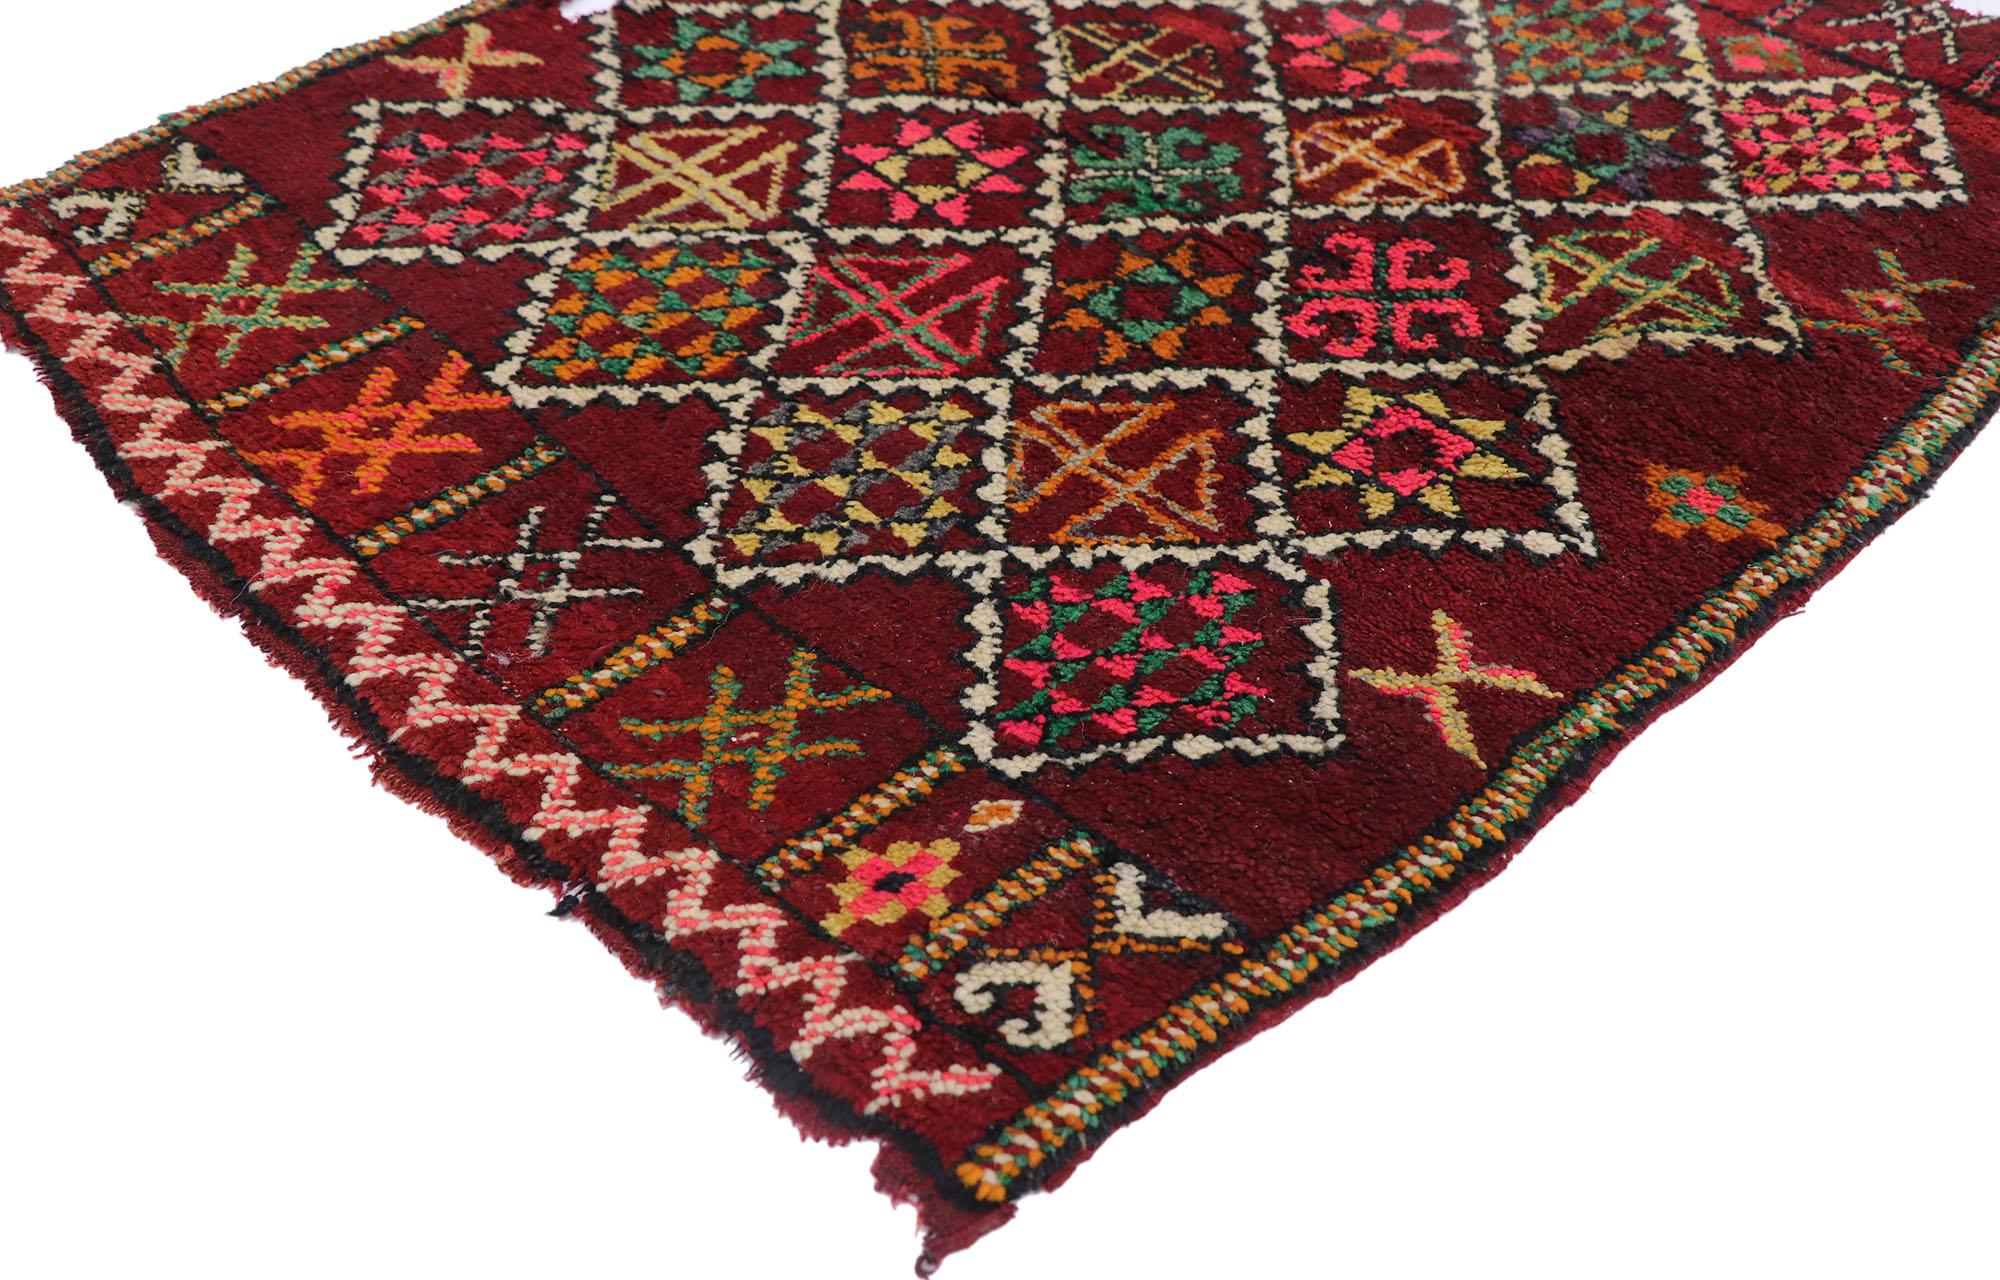 77899 Vintage Berber Moroccan Rug with Bohemian Tribal Style 02'05 x 03'00. Full of tiny details and a bold expressive design combined with vibrant colors and tribal style, this hand-knotted wool vintage Berber Moroccan rug is a captivating vision